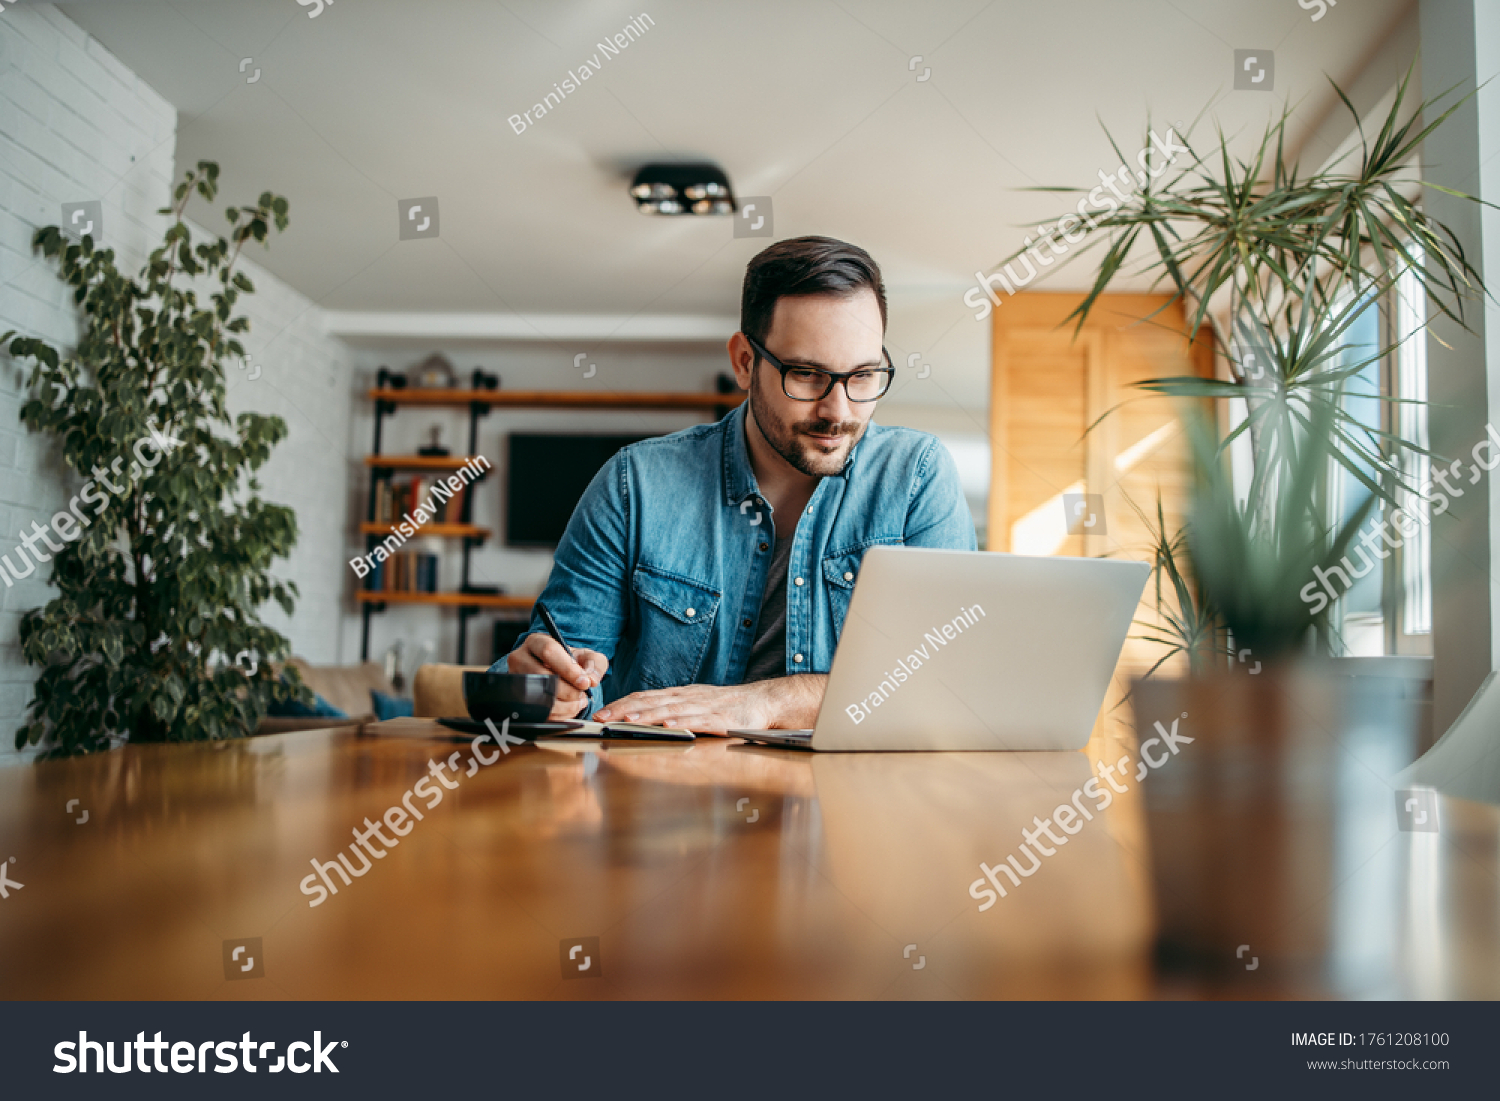 Handsome man taking notes and looking at laptop, at home office, portrait. #1761208100